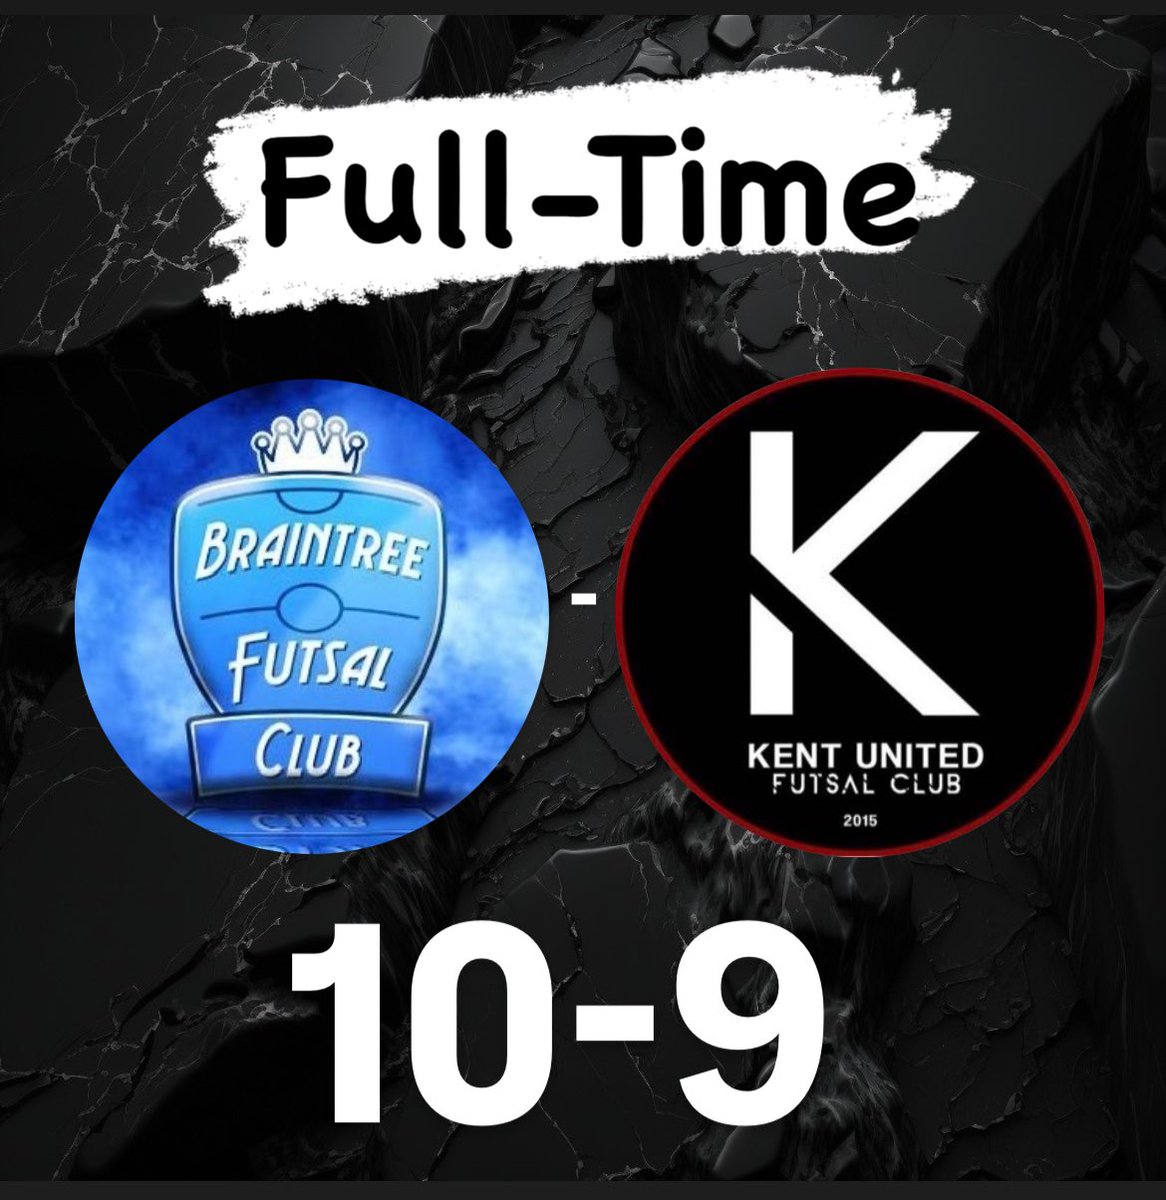 The Kent Army suffered a 10-9 loss to @braintreefutsalclub this afternoon, breaking their 2024 winning streak. Goal scorers for Kent: Aaron R 2x ⚽️ Harry S 1x ⚽️ Gui 1x ⚽️ Turan 1x ⚽️ Eman 1x ⚽️ Charlie 2x ⚽️ OG 1x ⚽️ It’s on to the next one for Kent!